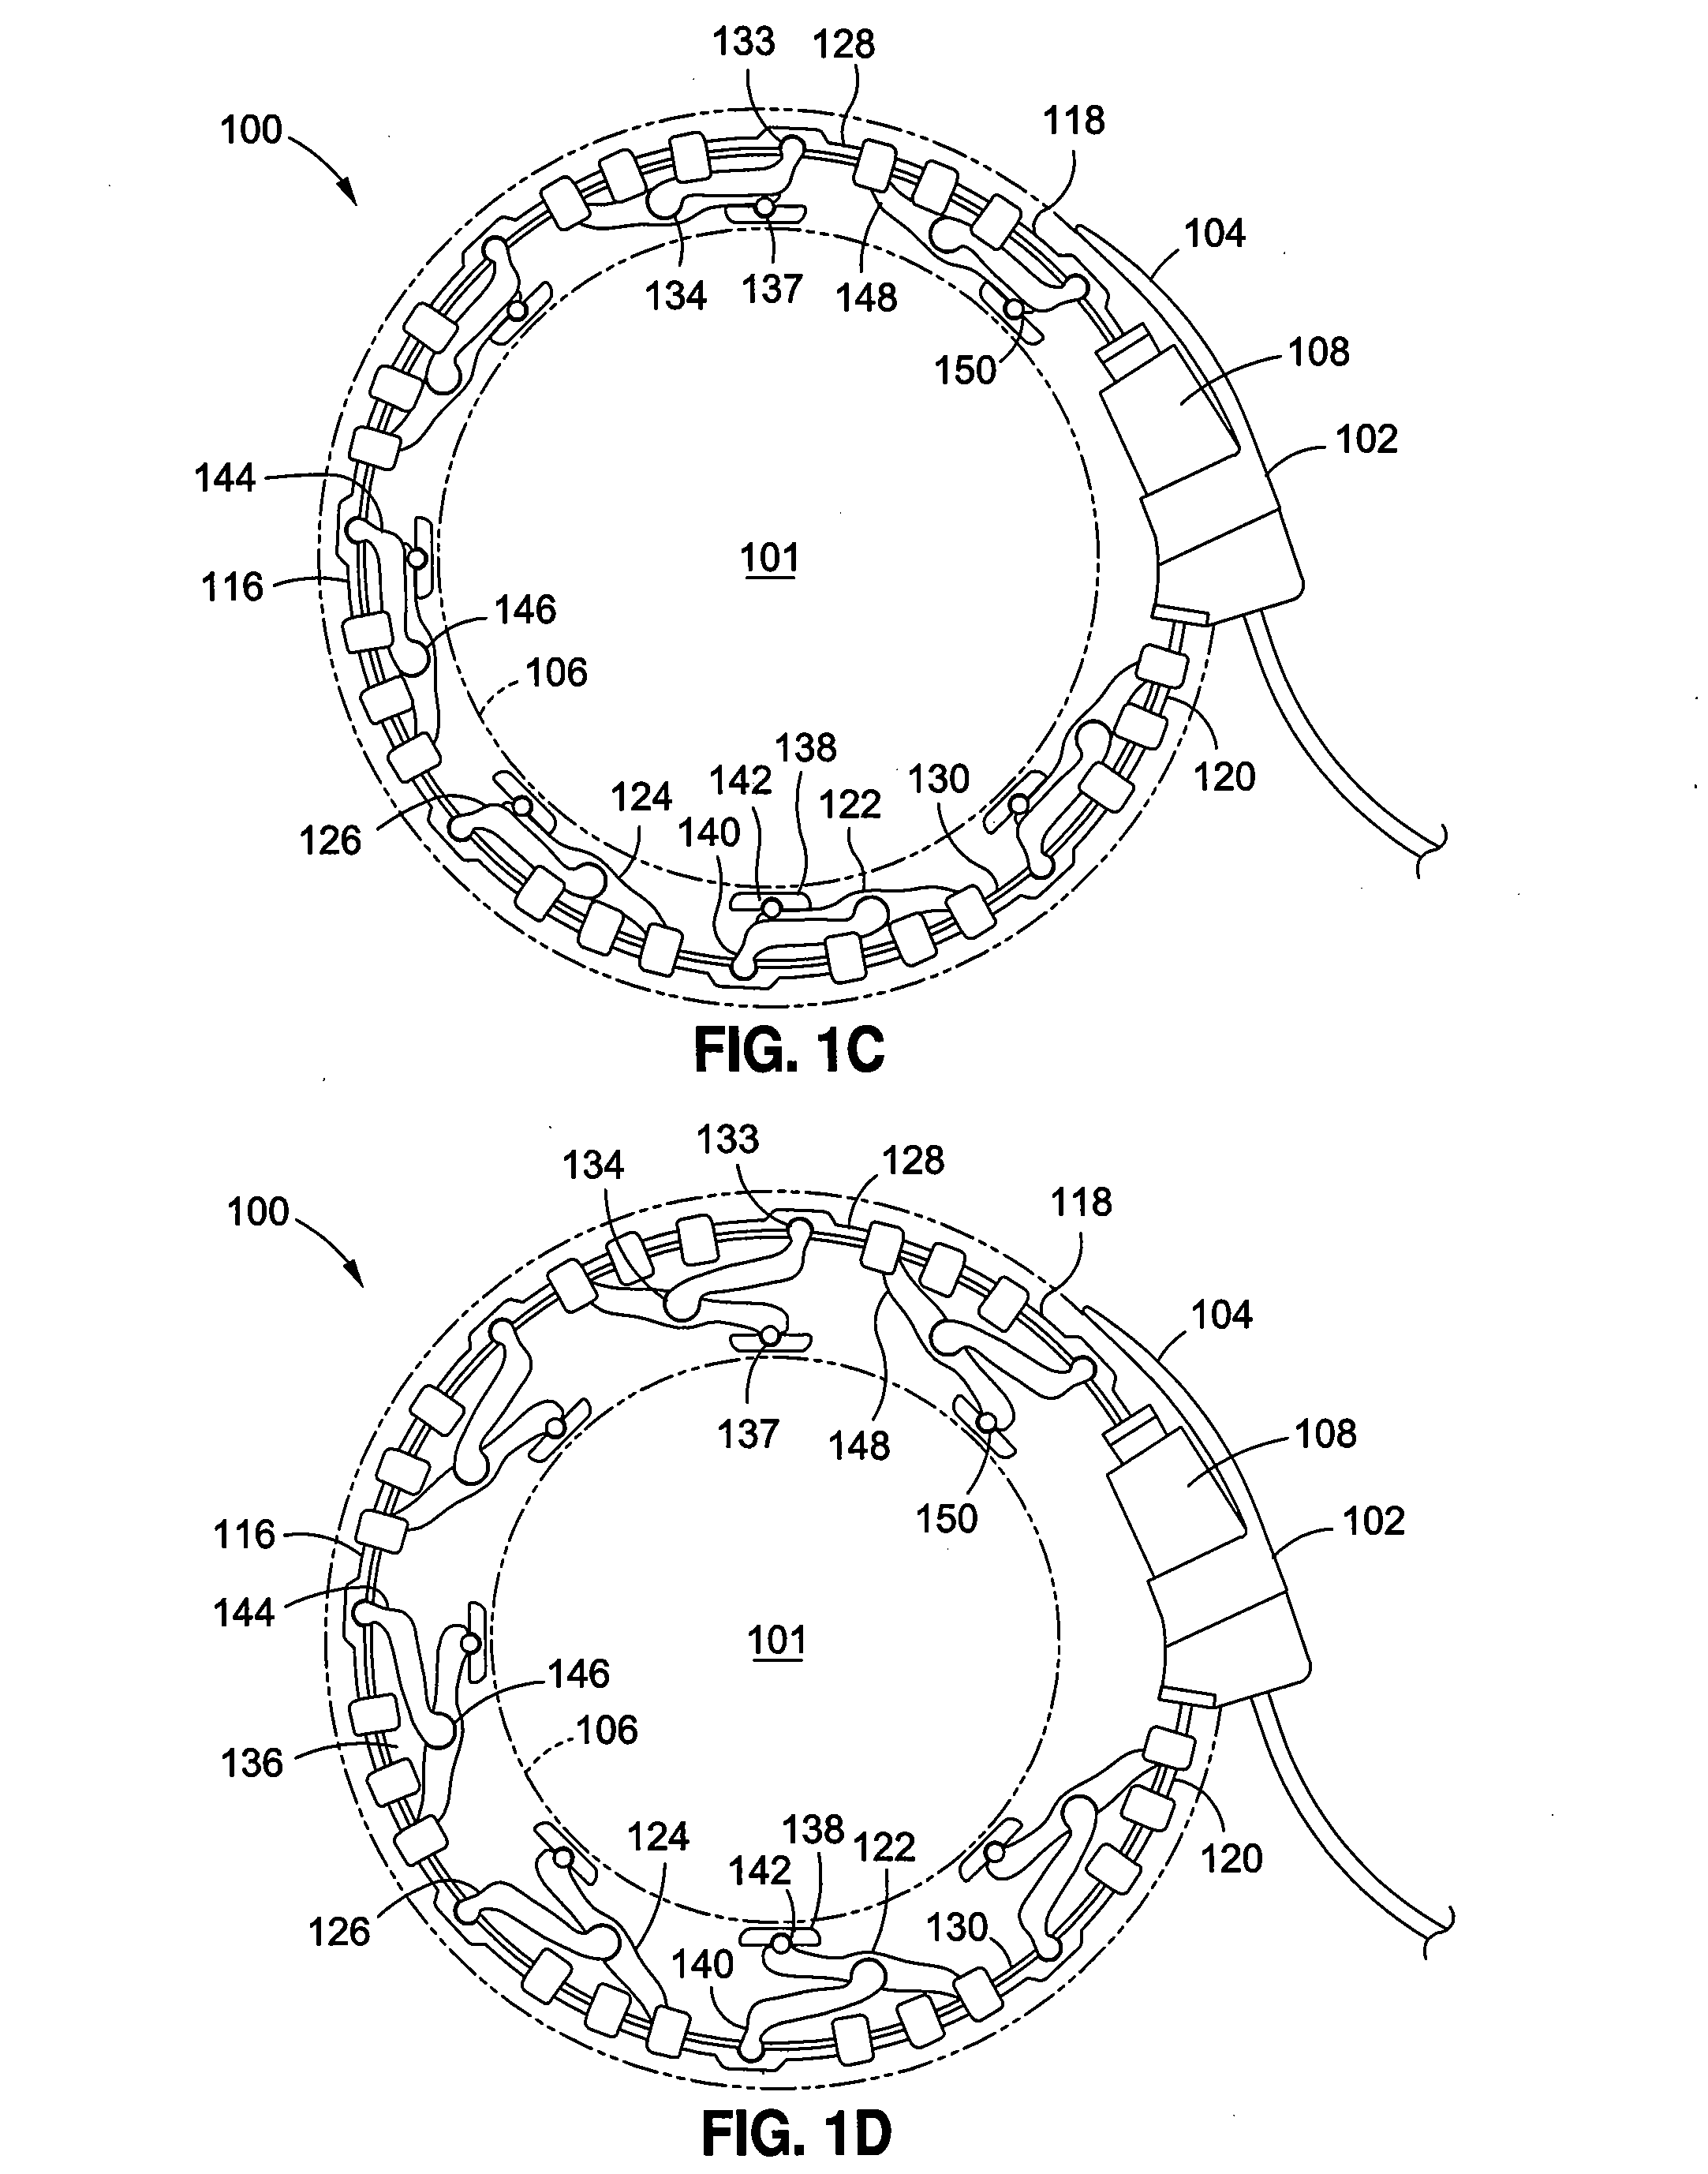 Gastric band devices and drive systems